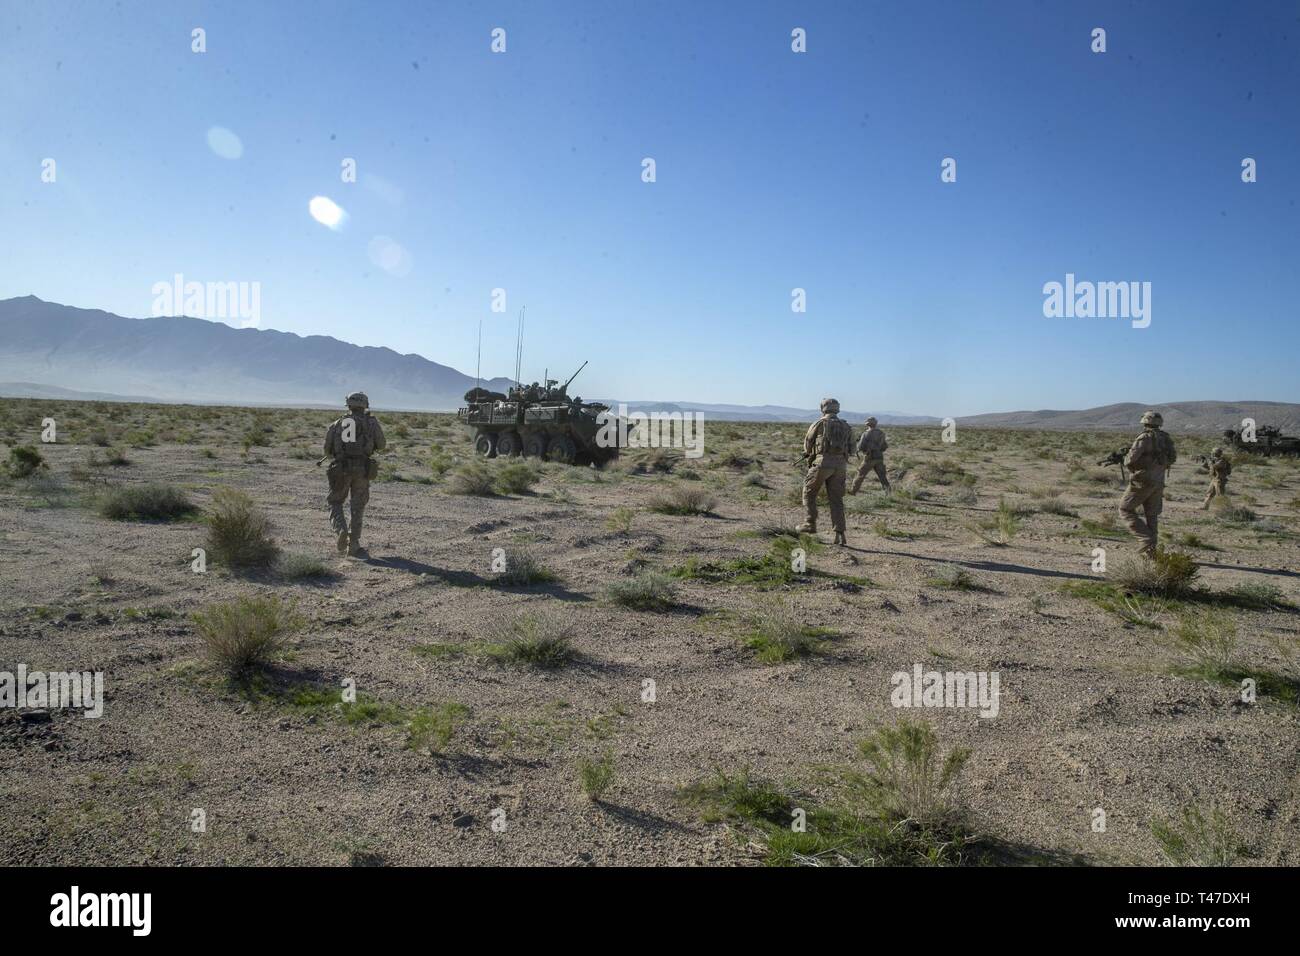 U.S. Marines with 2nd Light Armored Reconnaissance Battalion, 2nd Marine Division close in on an enemy vehicle during a deployment for training at Fort Irwin, California, March 17, 2019. The Marines of 2d Light Armored Reconnaissance Battalion participated in National Training Center 19-05 as the opposing force against the 2nd Armored Brigade Combat Team, 1st Infantry Division. The exercise provided Marines and Sailors an opportunity to sustain training in primary conventional combat operations against a peer competitor. Stock Photo